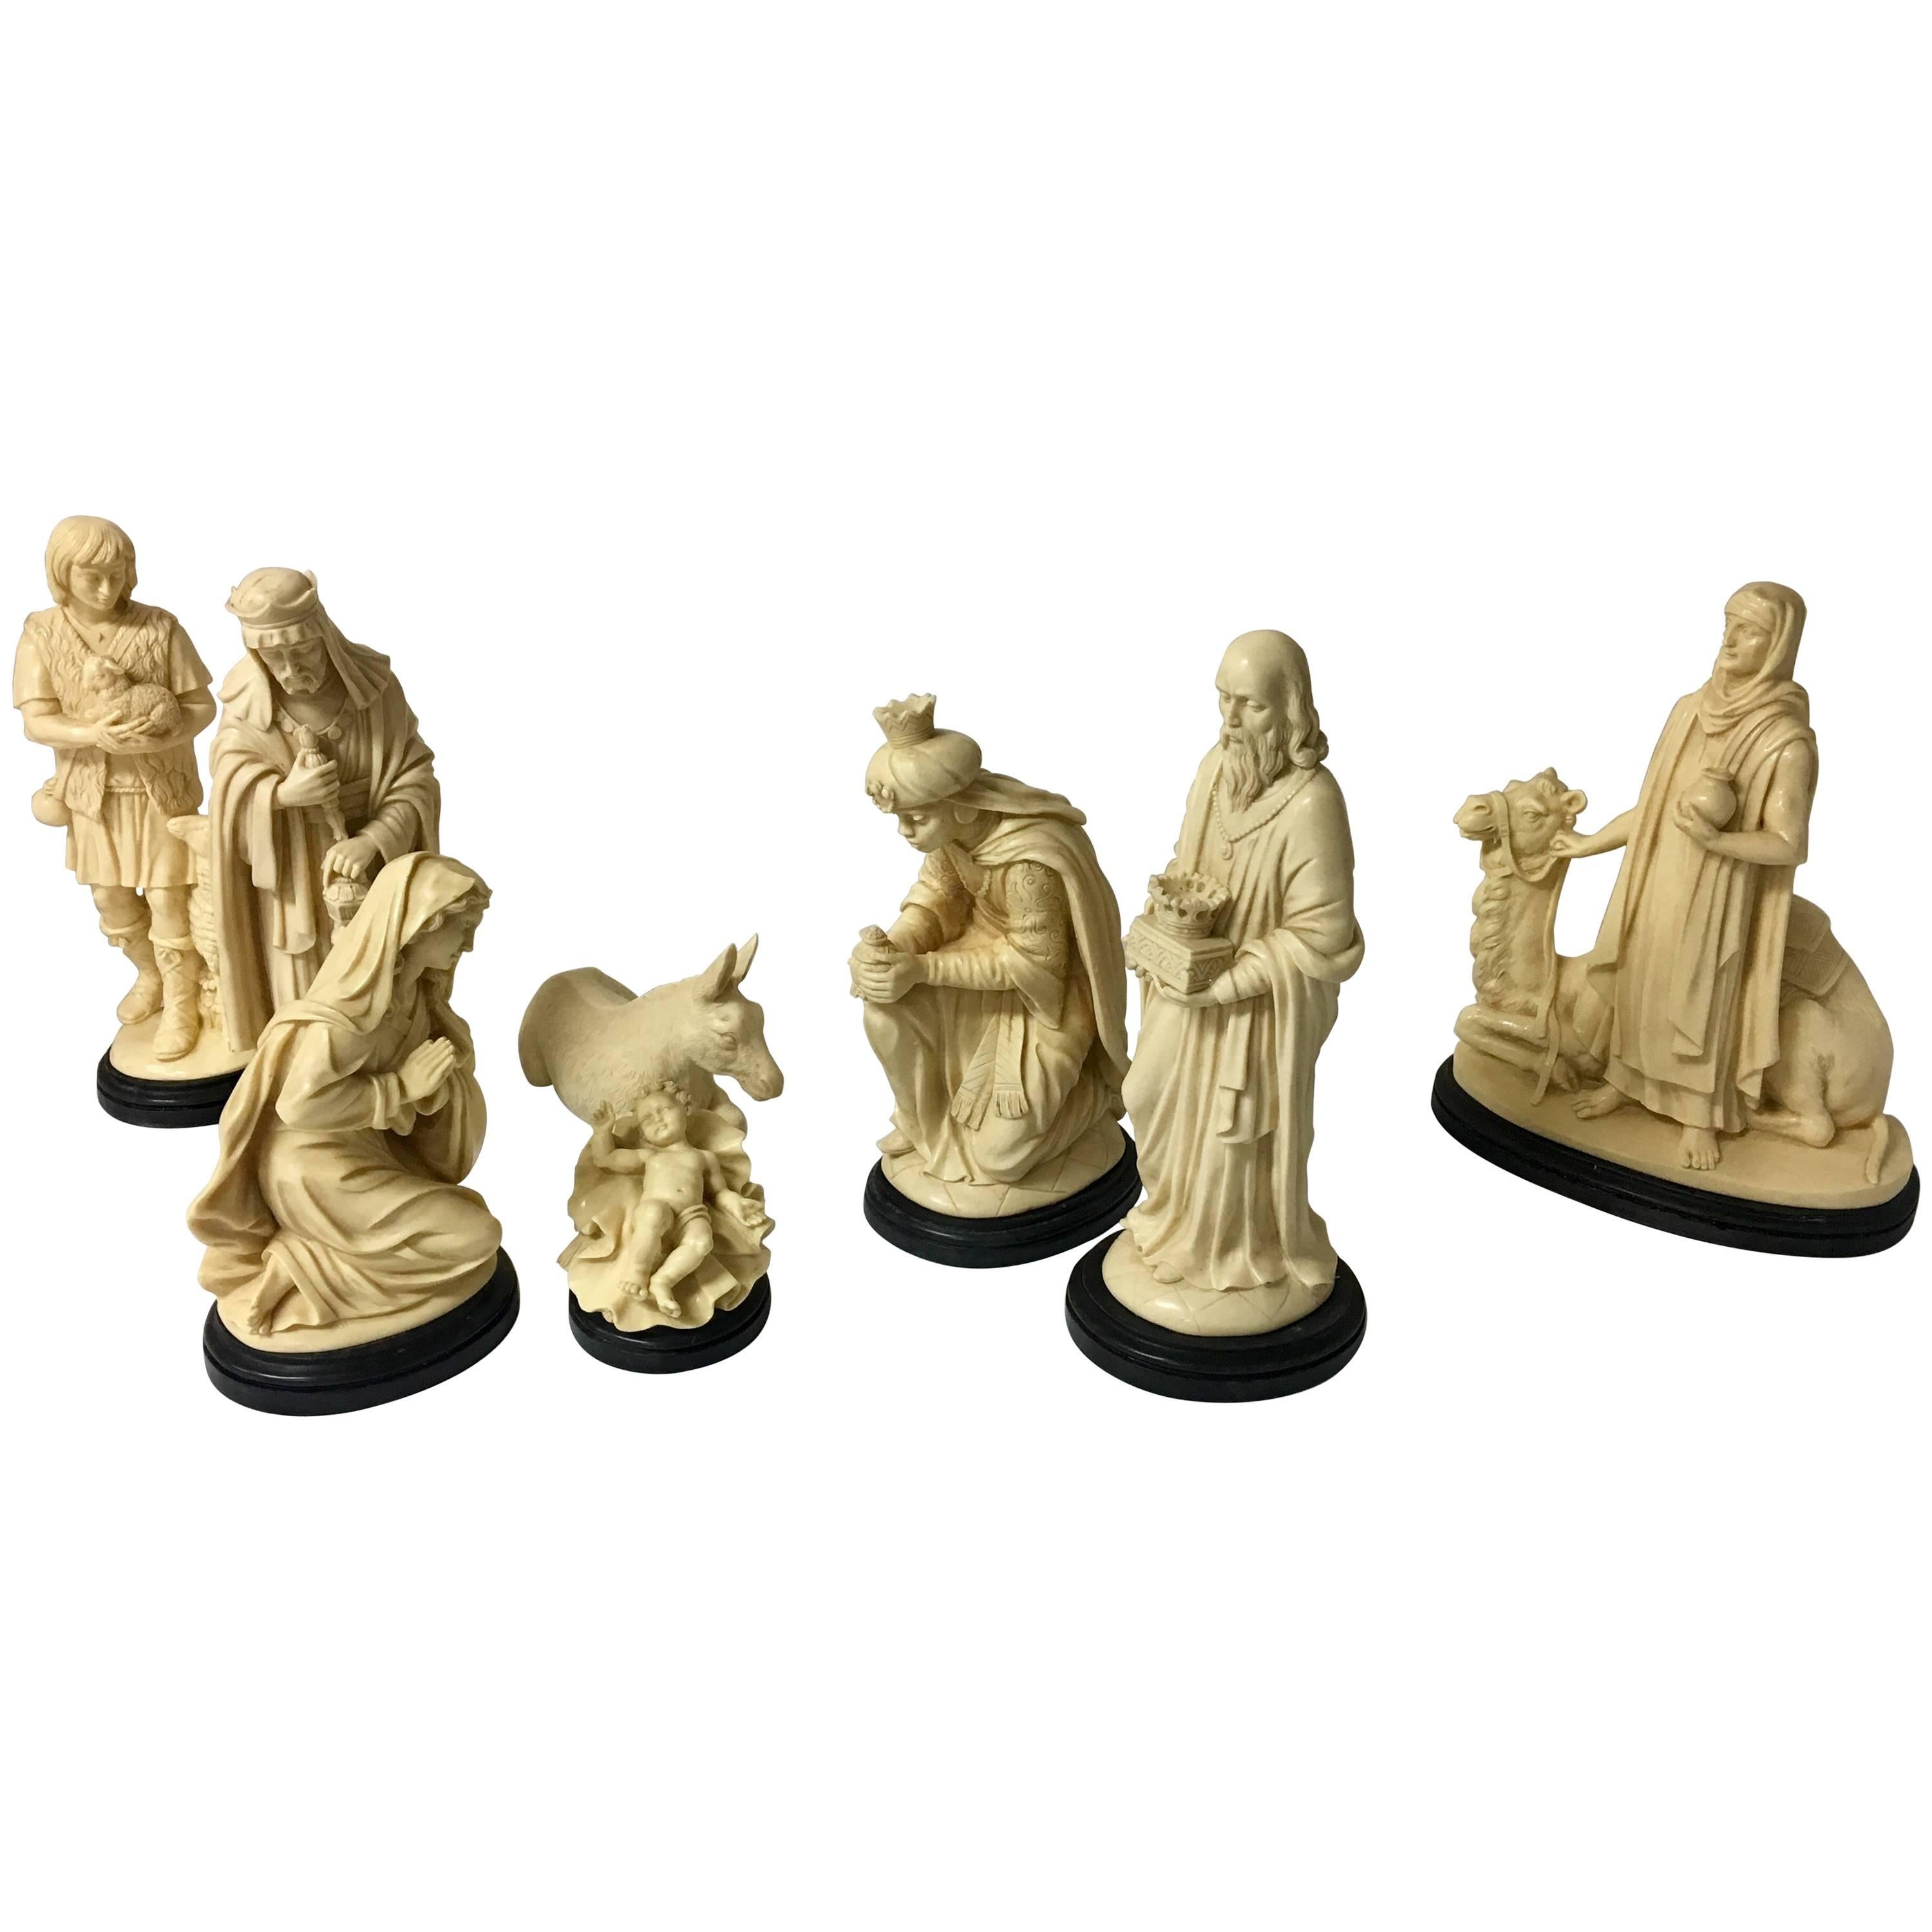 Beautiful Vintage Italian Nativity Set in Resin Signed by G. Ruggeri for Bianchi